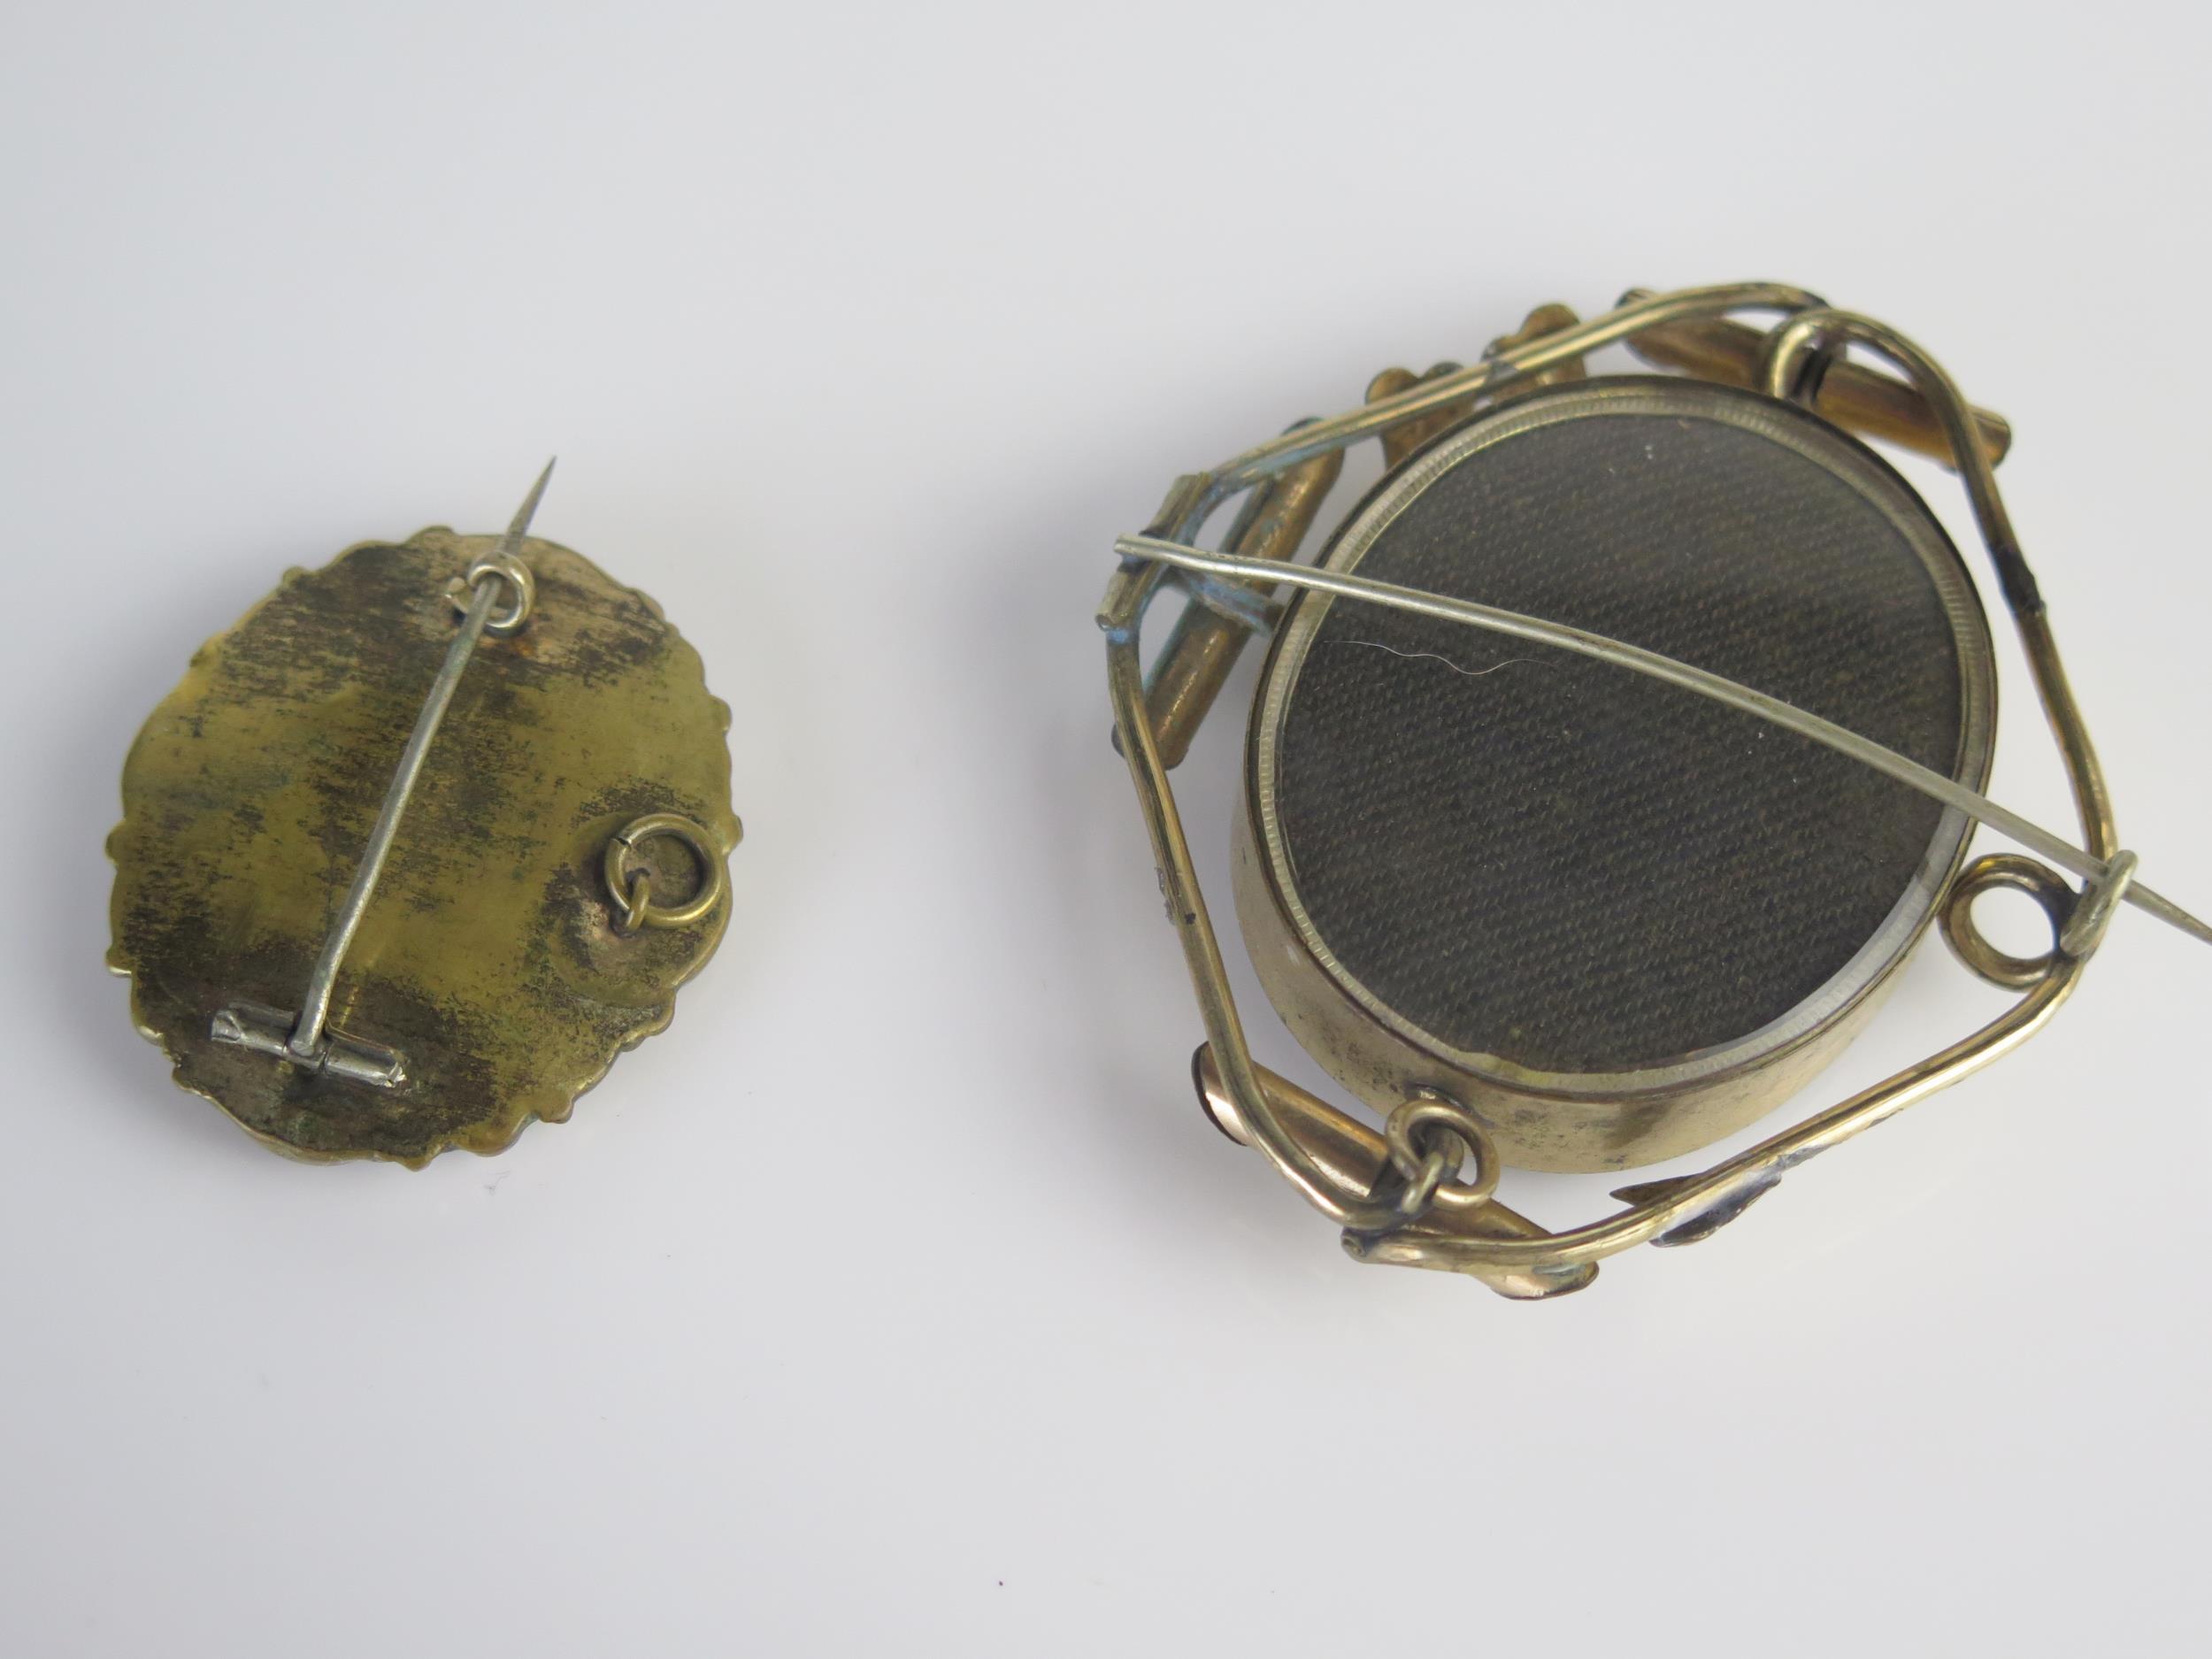 Two Victorian Memorial Brooches including one set with a plume of hair embellished with gold - Image 2 of 2